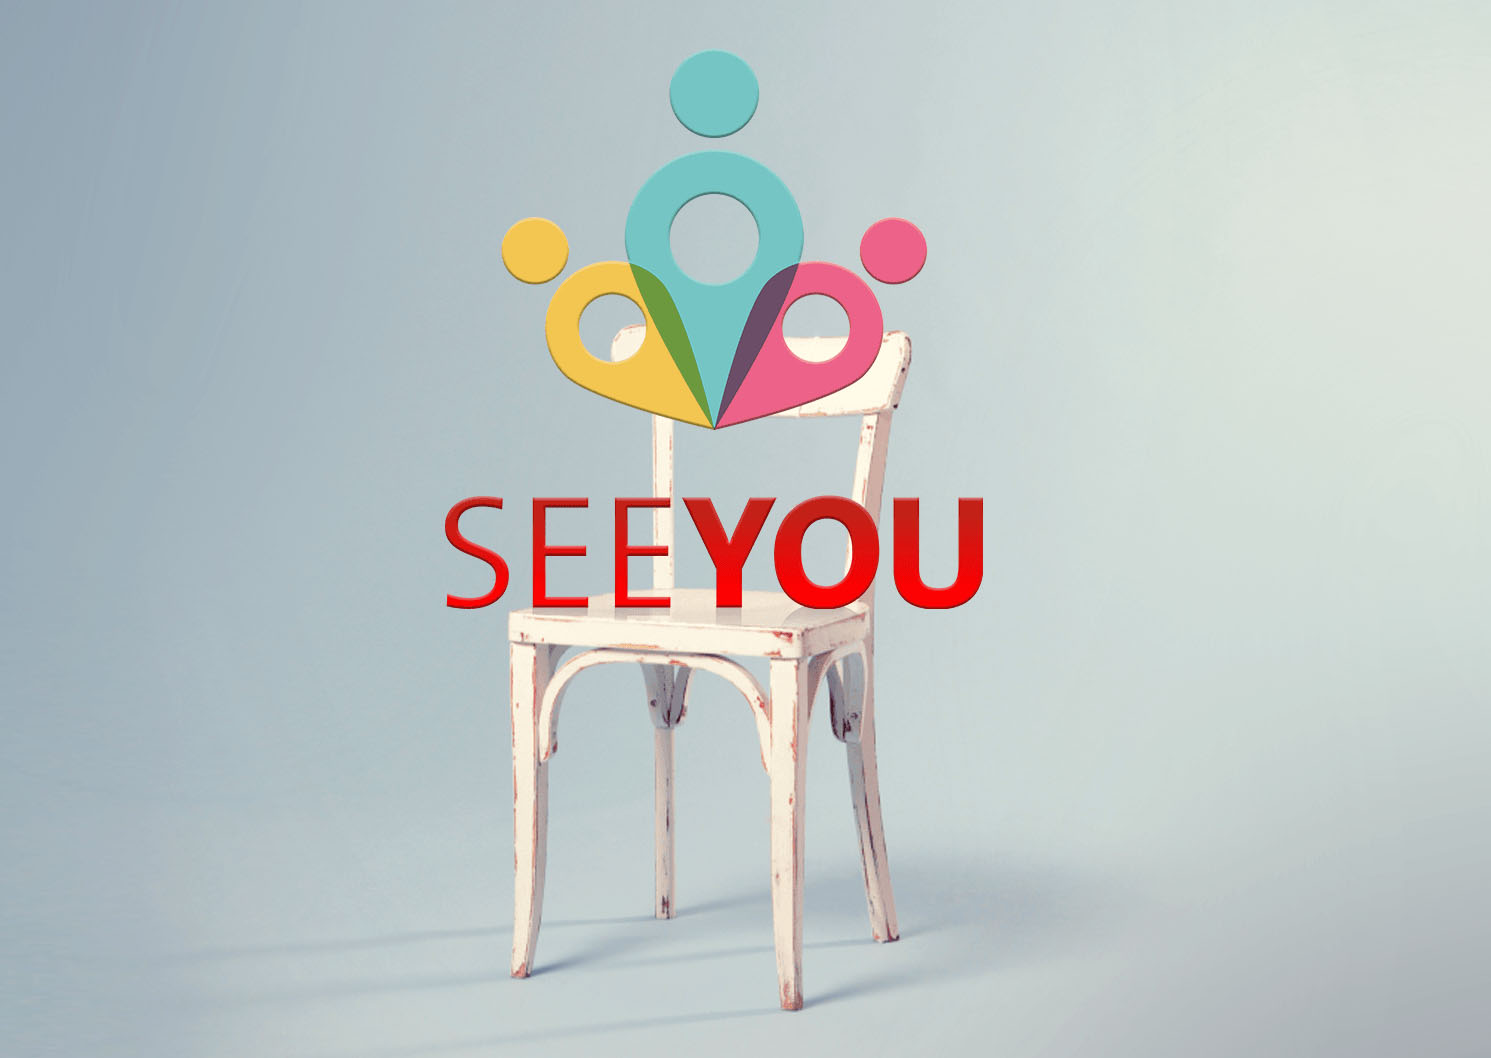 A white chair with the text "See you" placed above the seat.